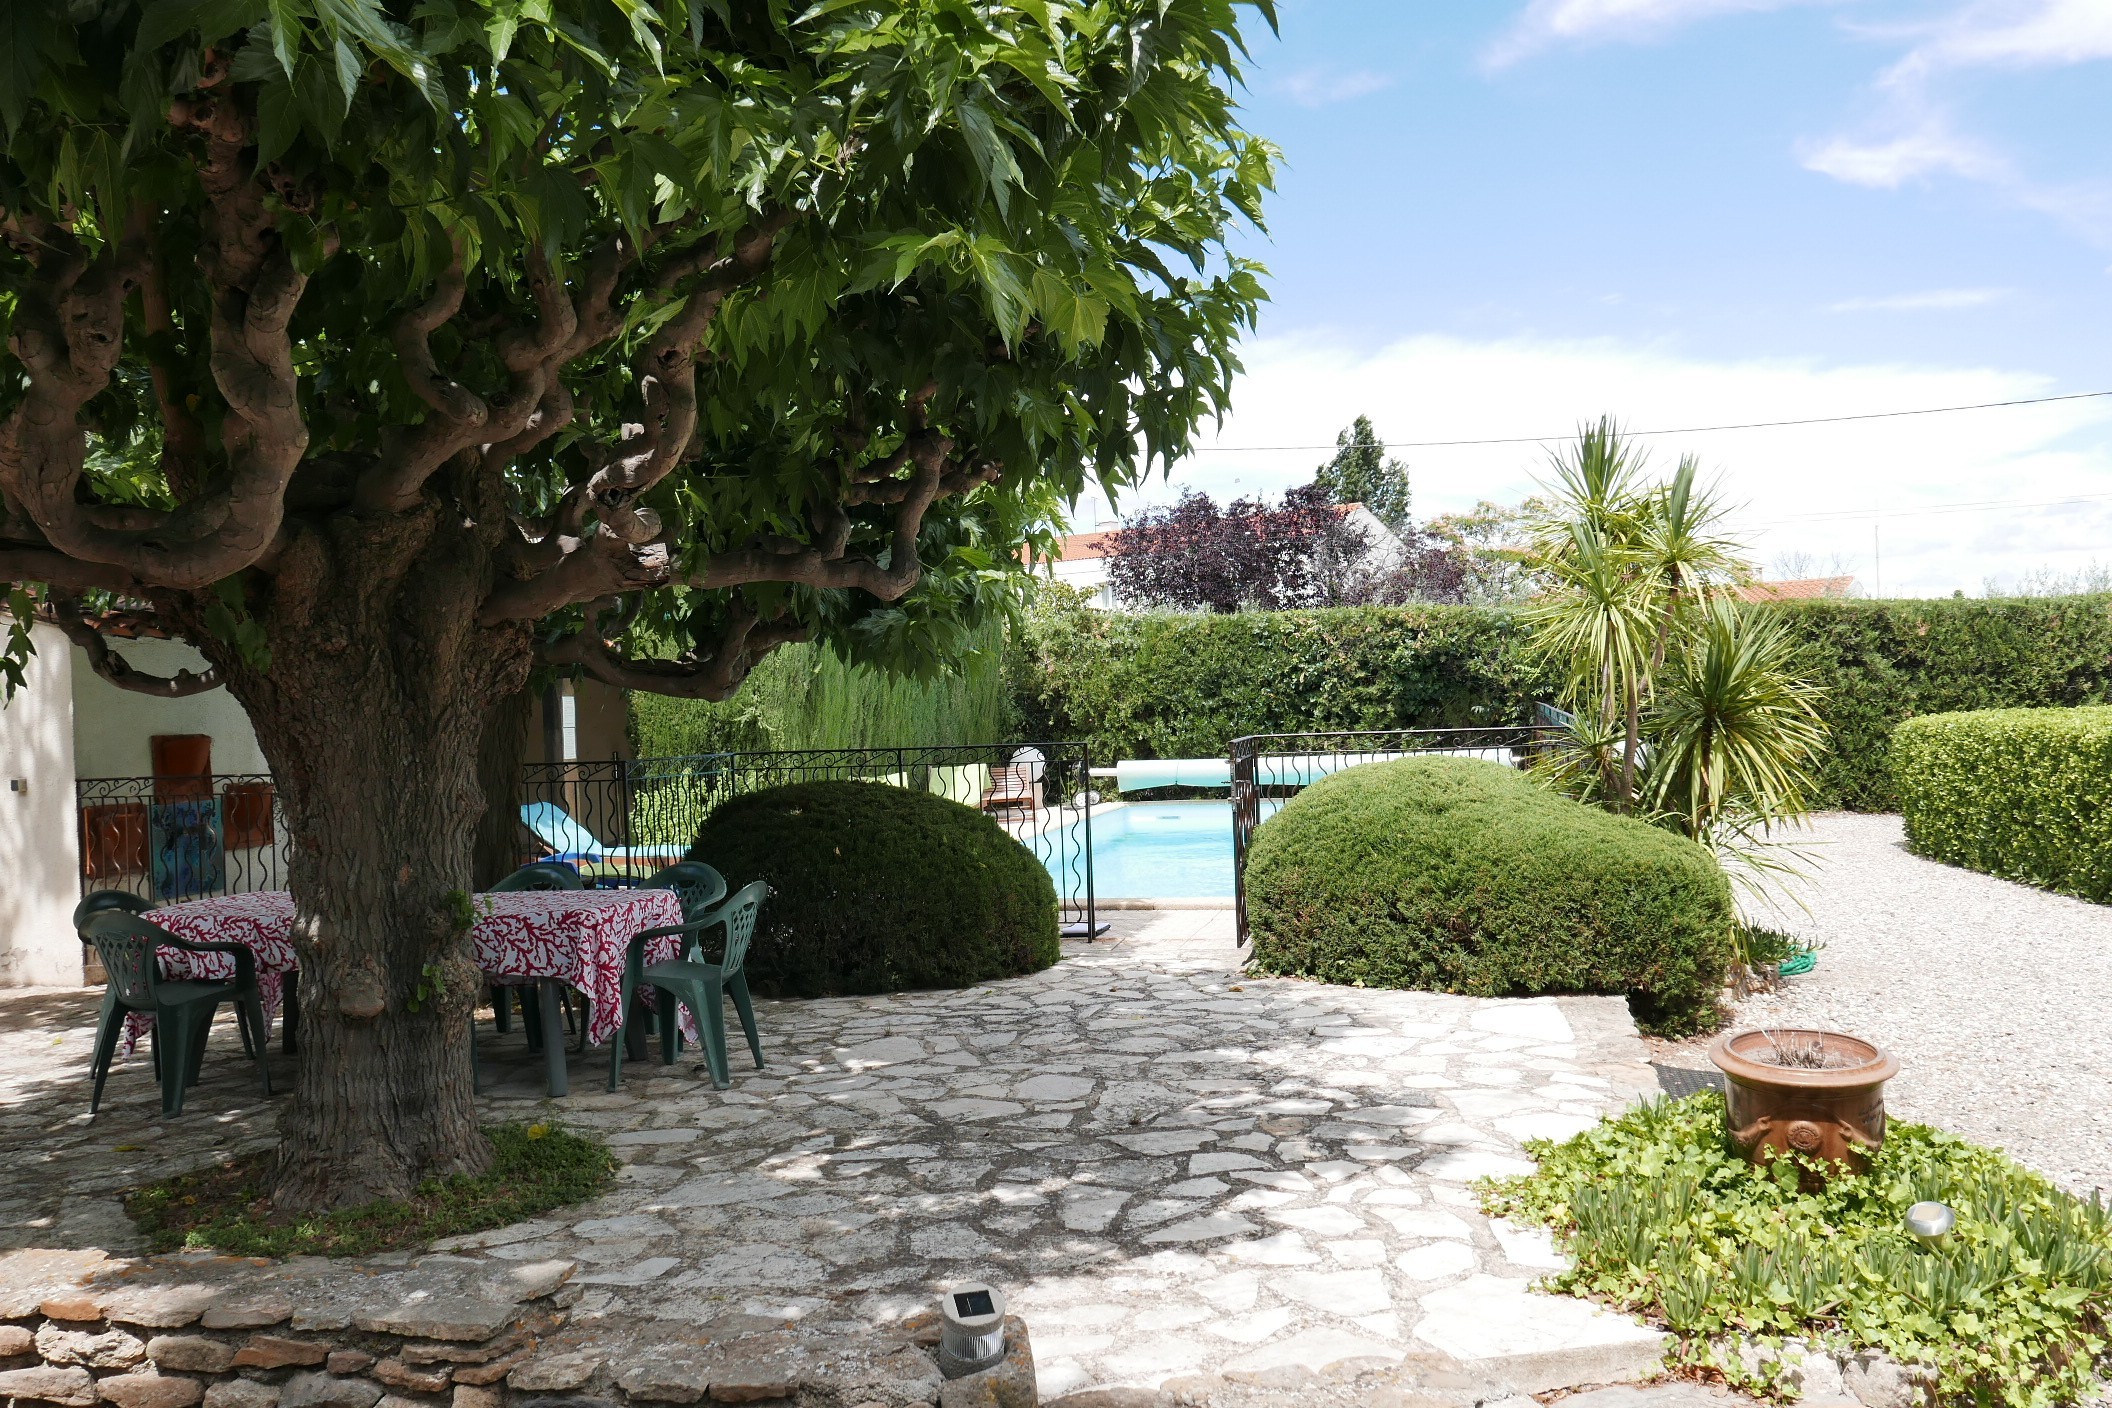 Qlistings - Beautiful Renovated Character House Offering 3 Accomodations On 1810 M2 With Pool. Rare Property Image